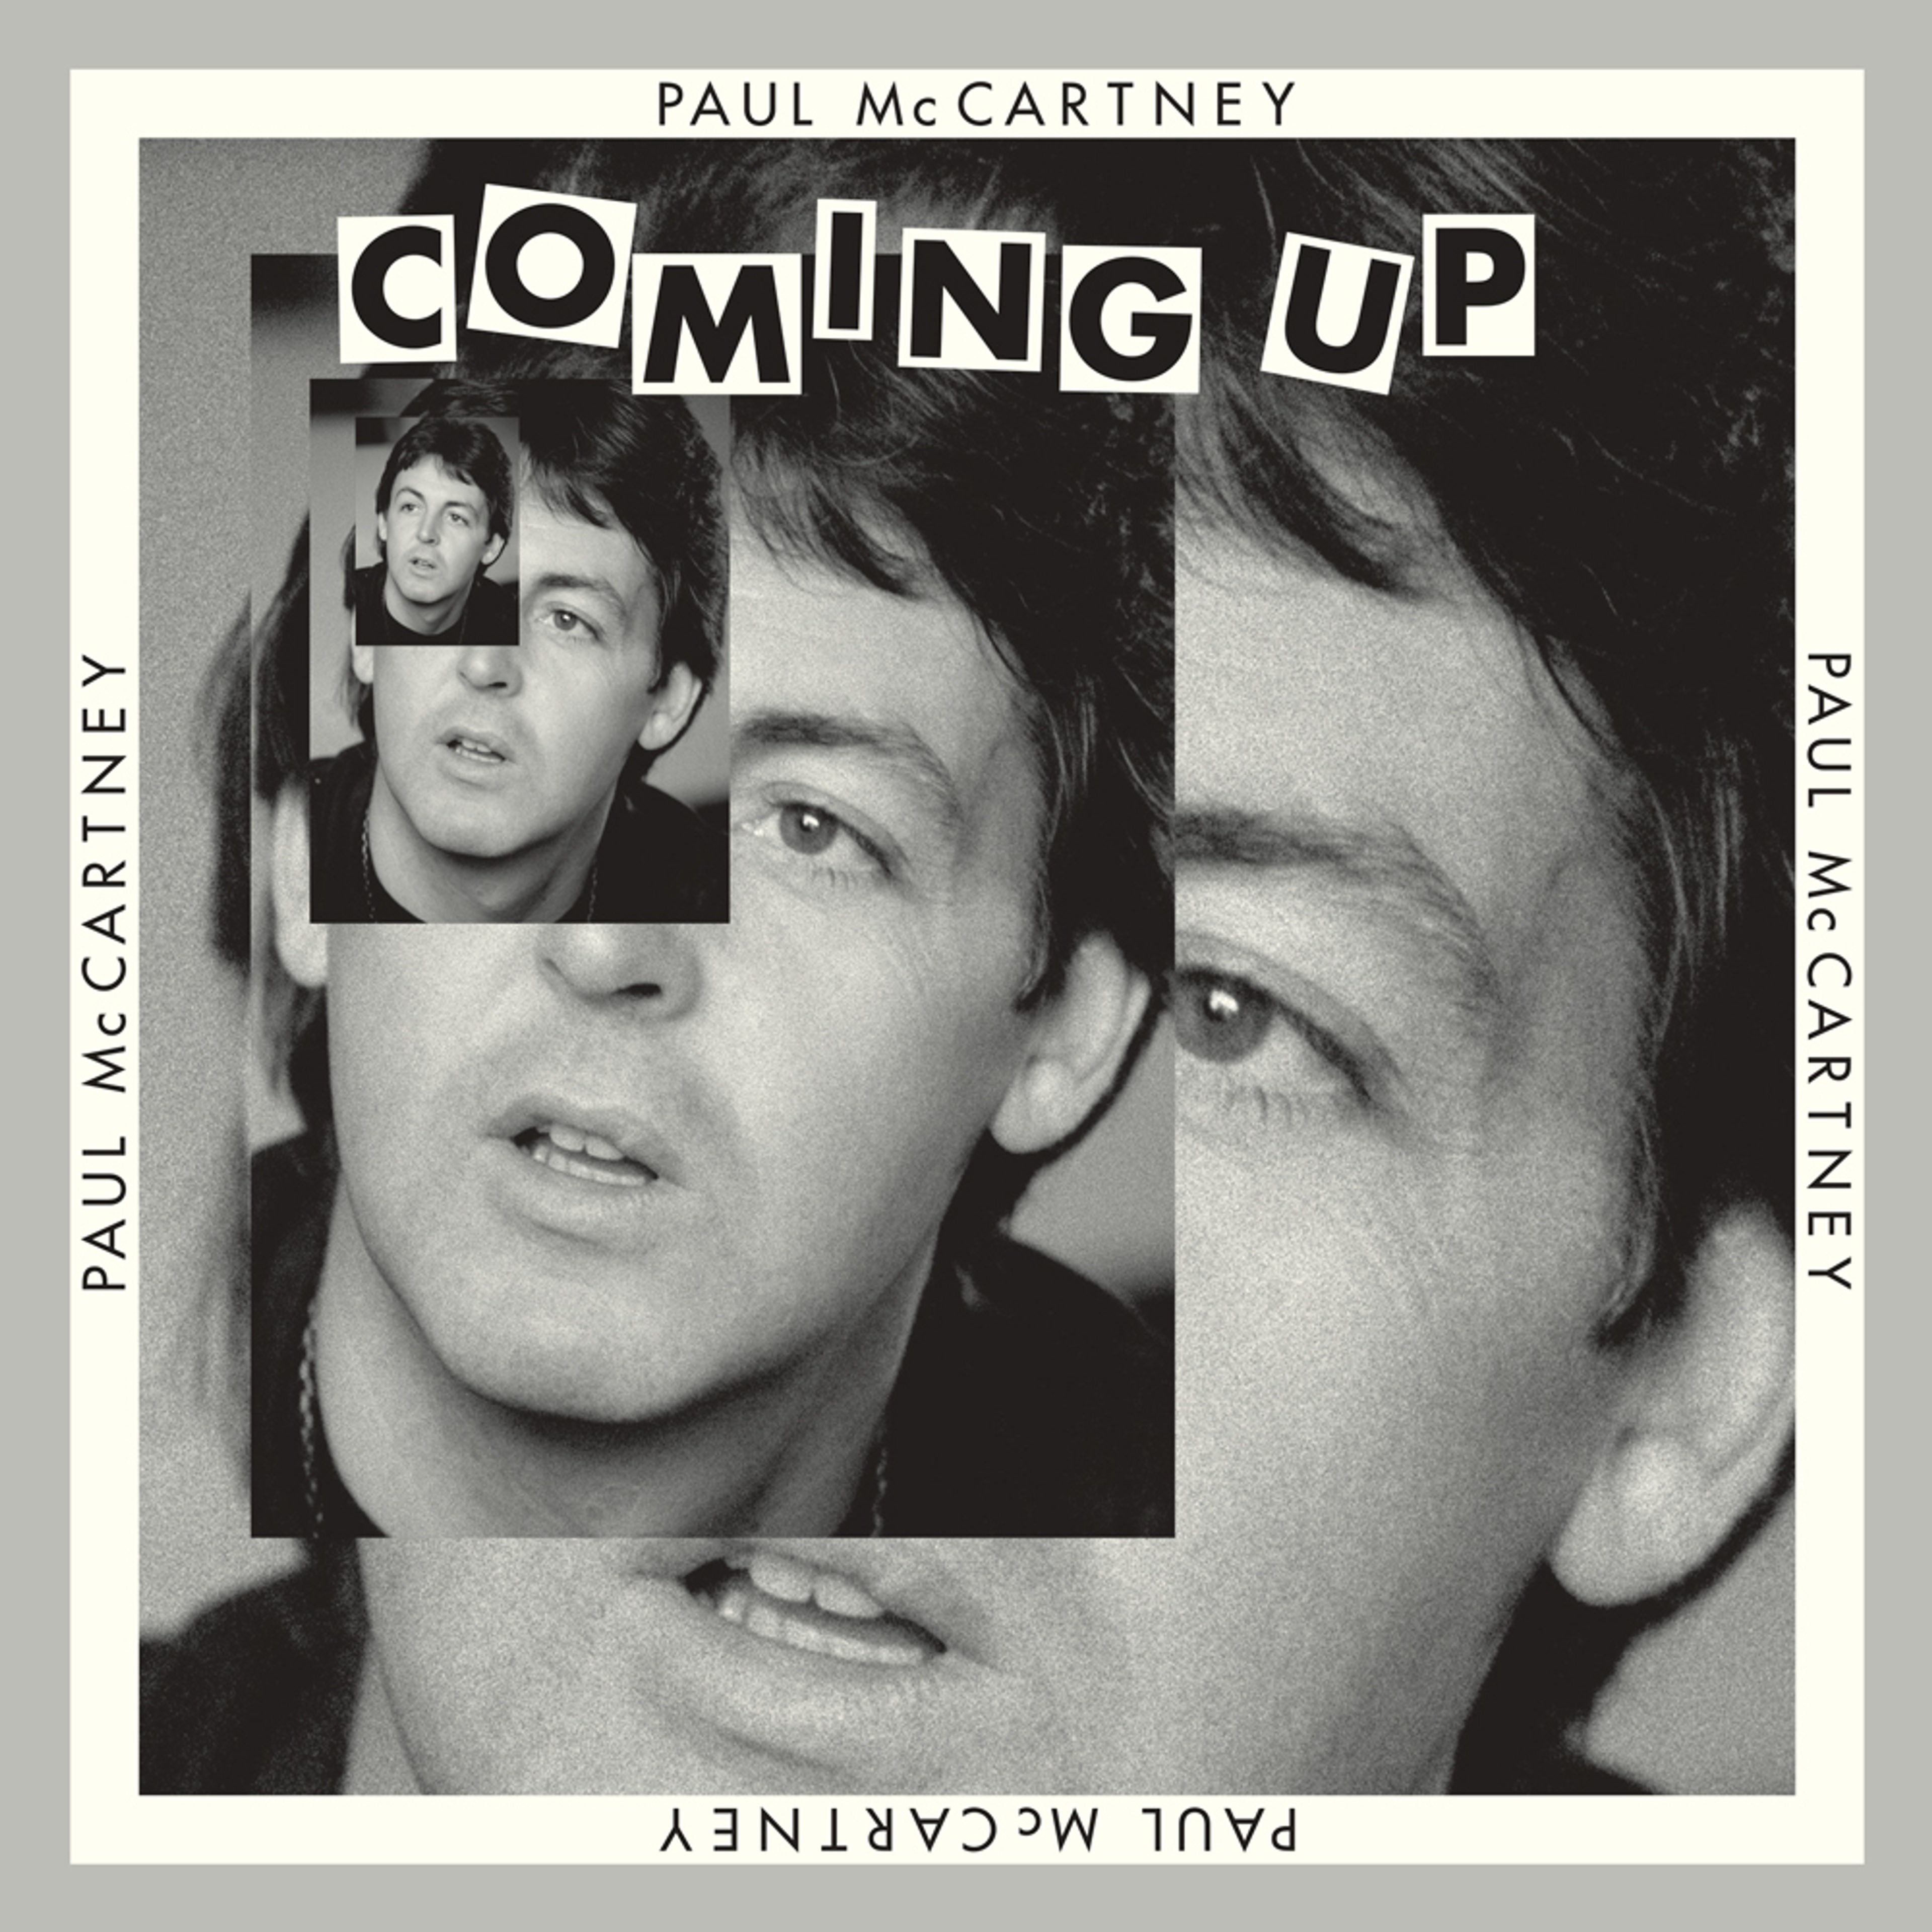 “Coming Up” Single artwork as featured in 'The 7" Singles Box'